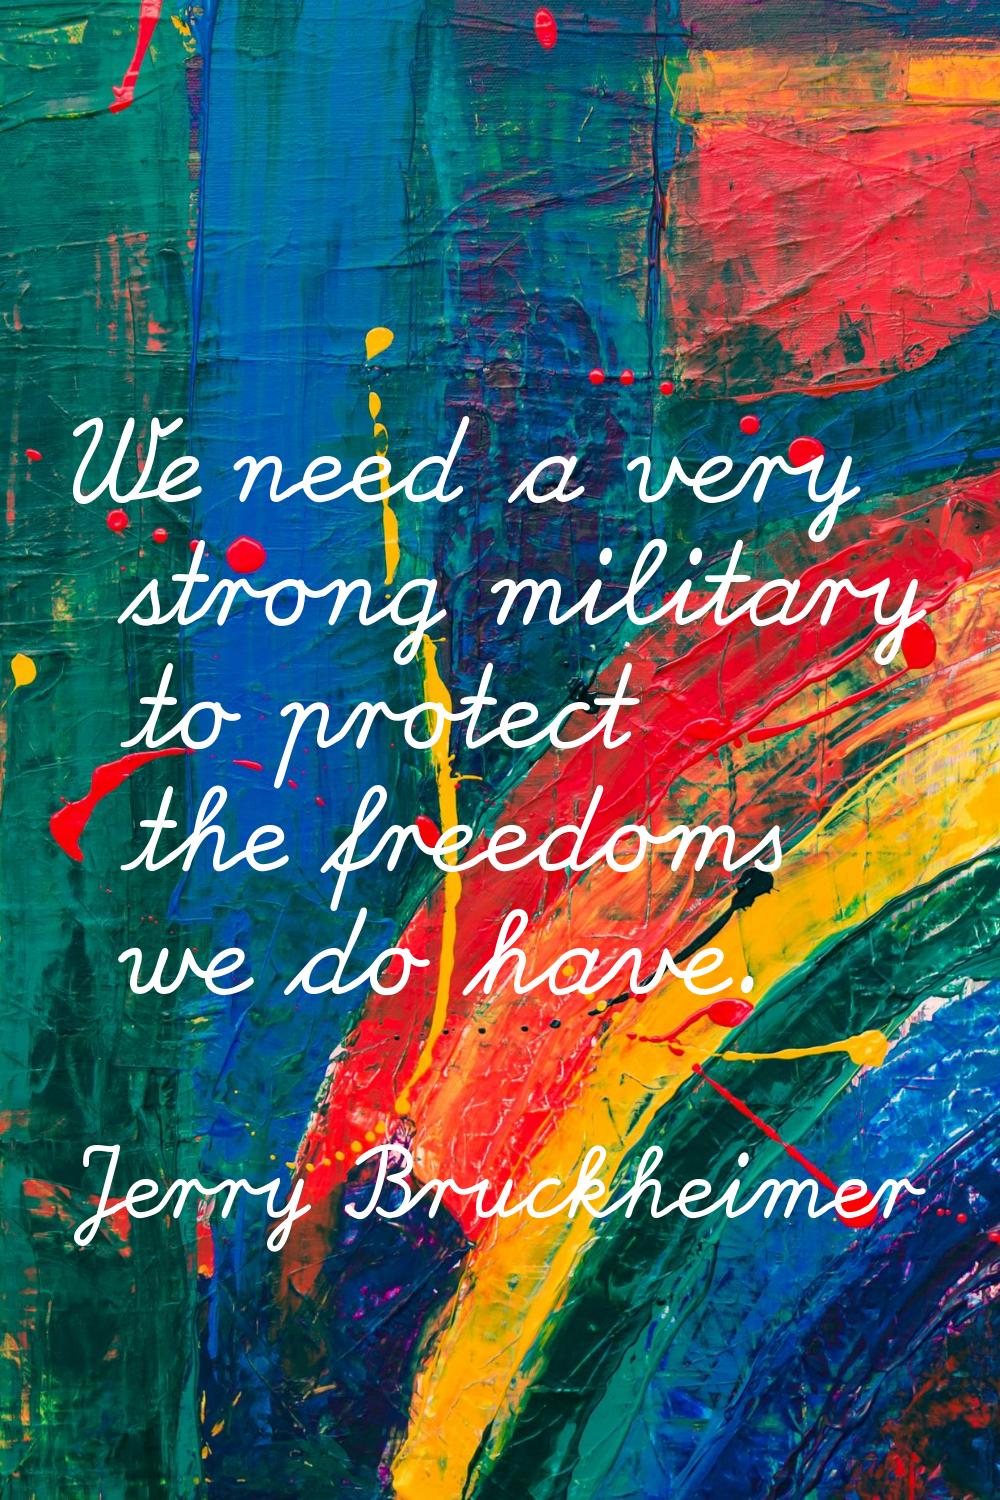 We need a very strong military to protect the freedoms we do have.